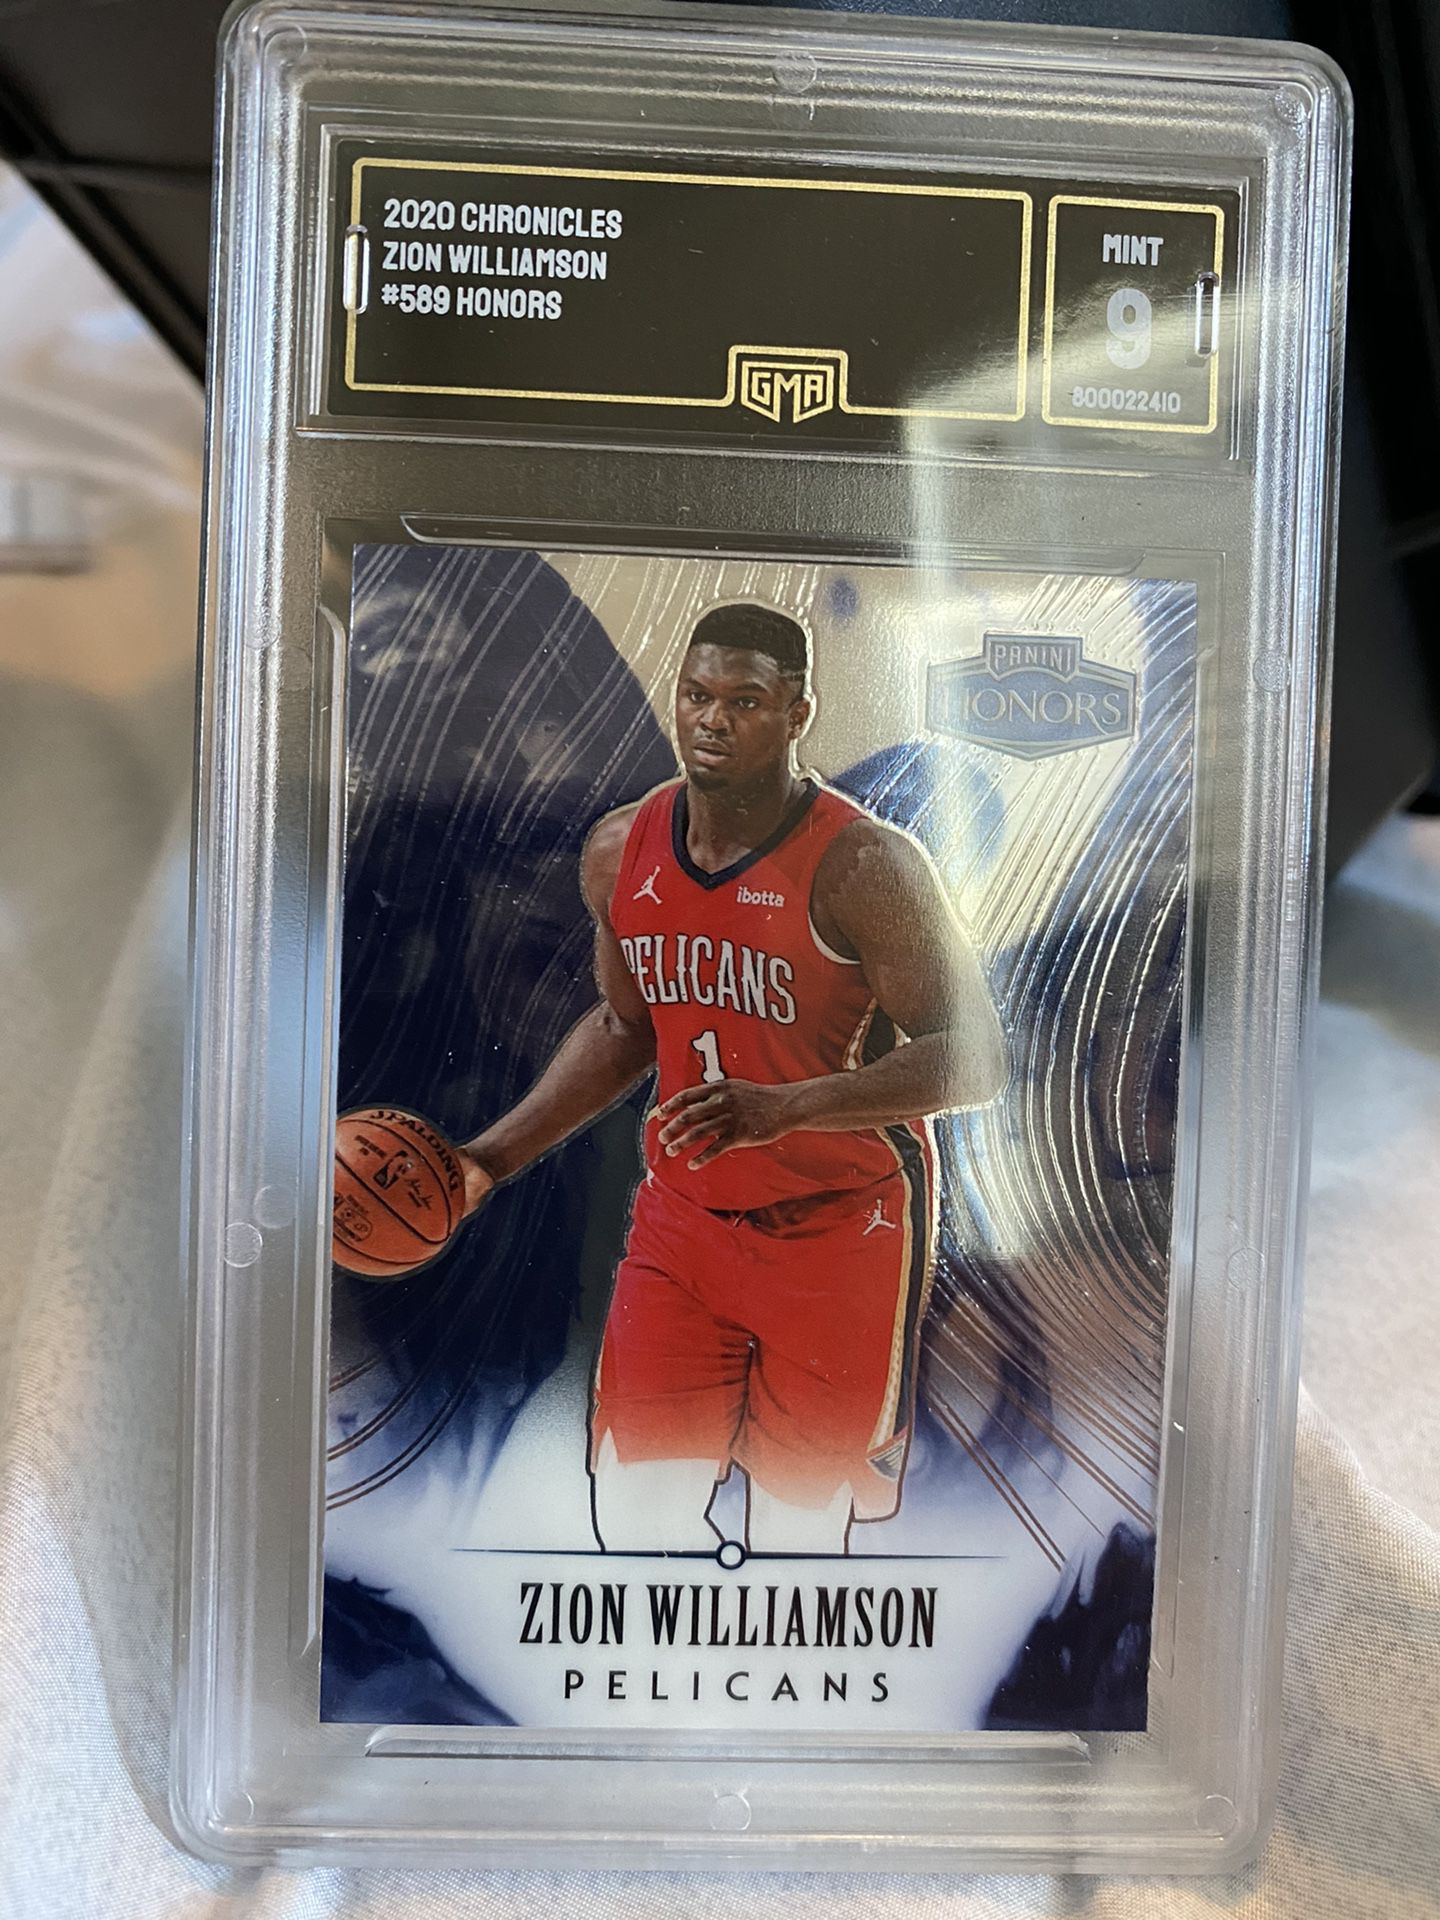 2020 Chromicles Zion Williamson Honors  Mint 9